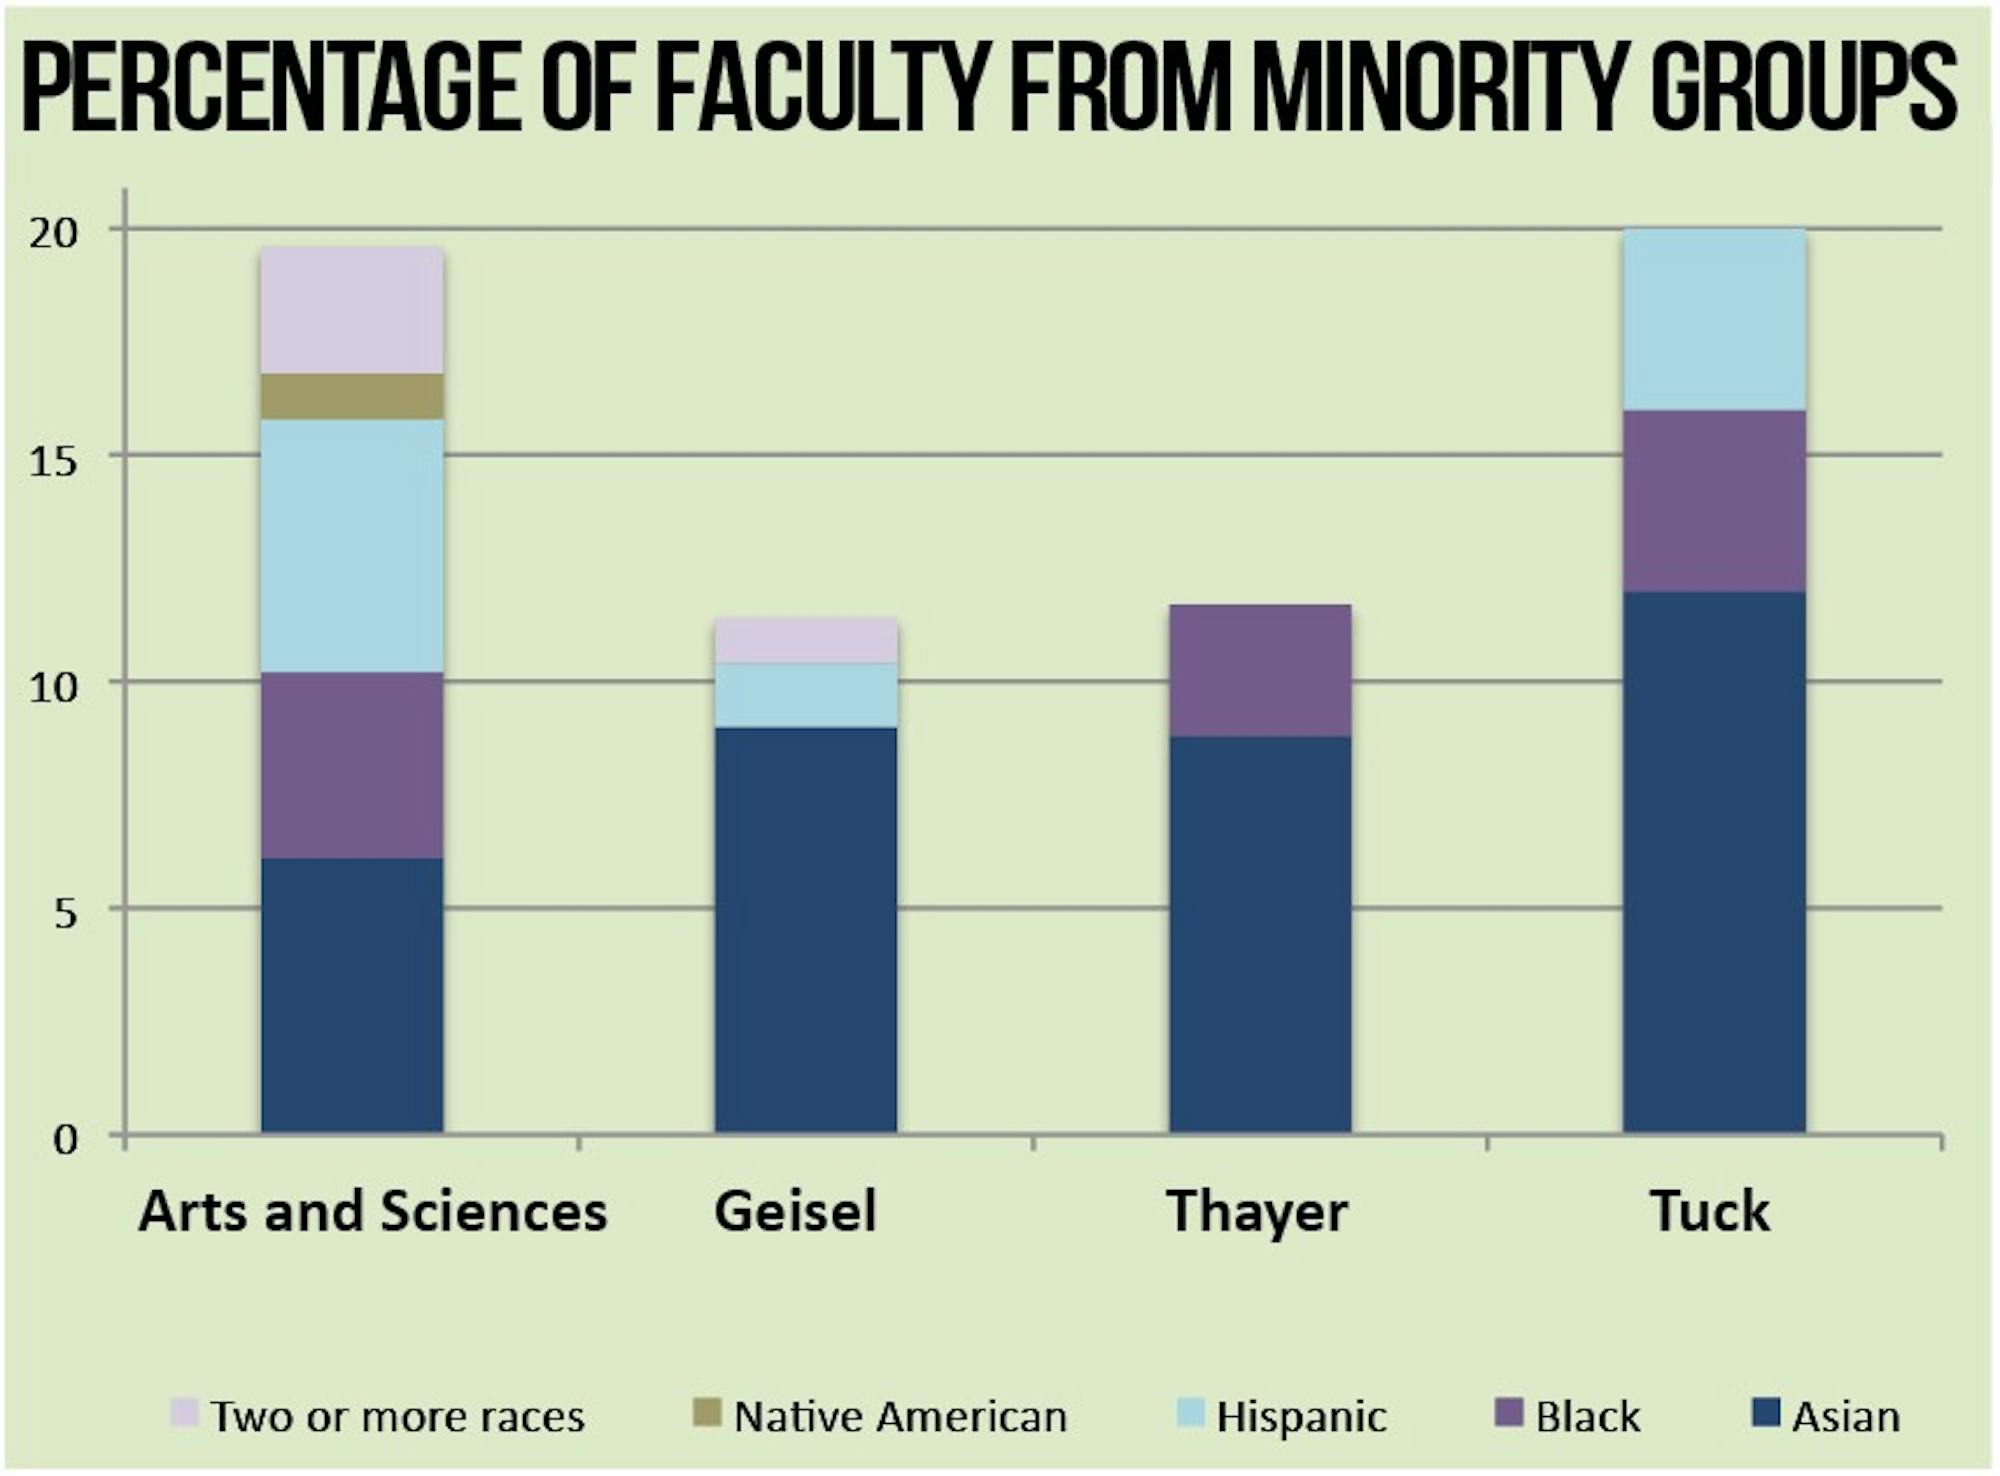 Across schools, Dartmouth’s faculty remains predominantly white and fewer than 20 percent are minorities.